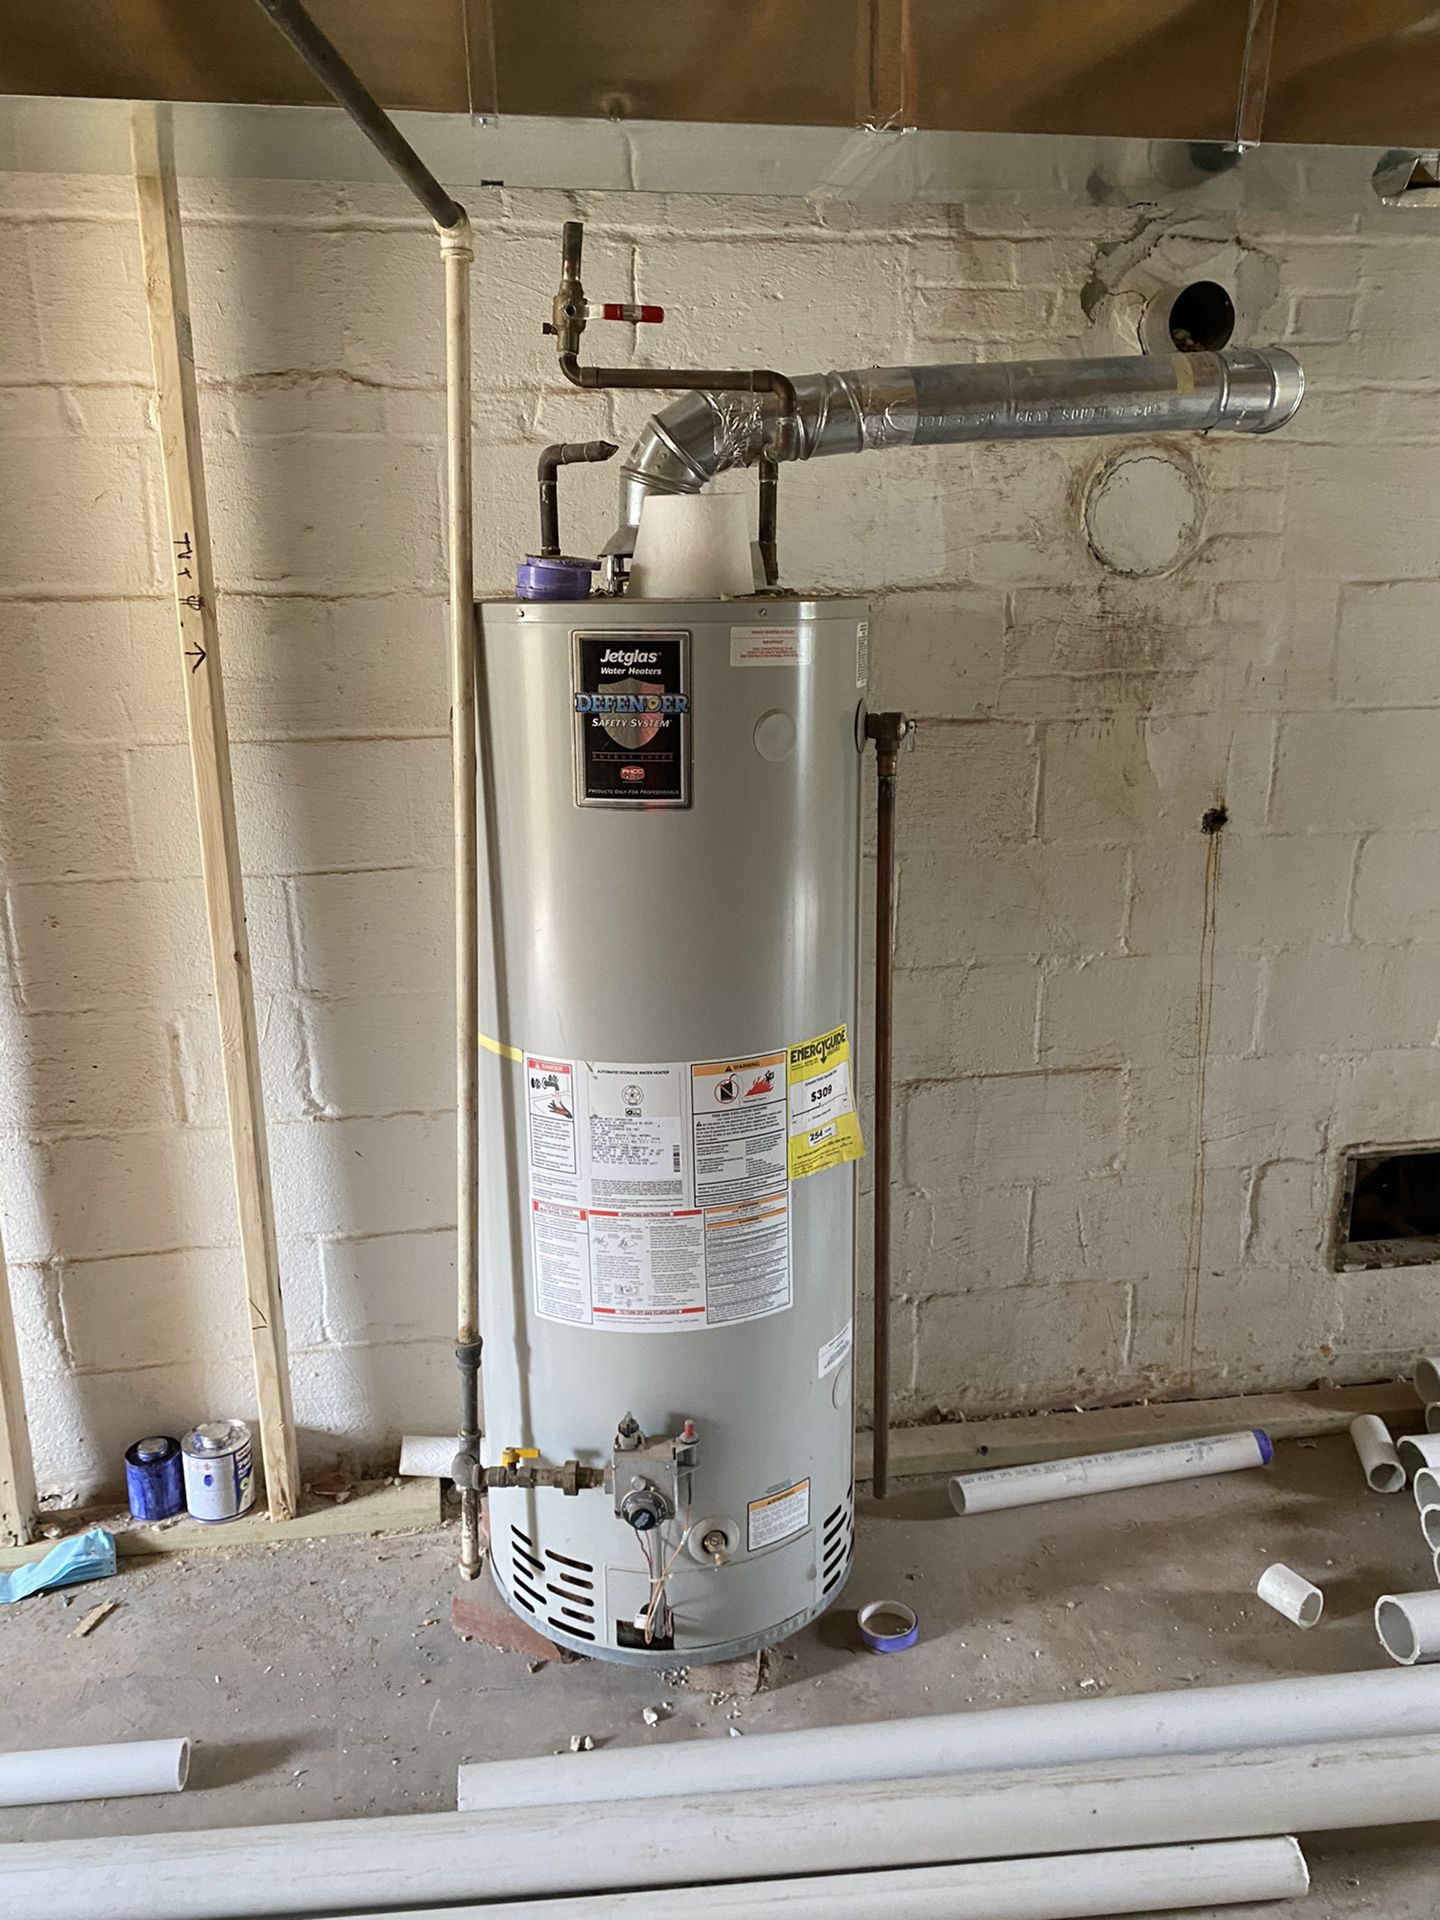 Free gas water heater, 50 galons, works well